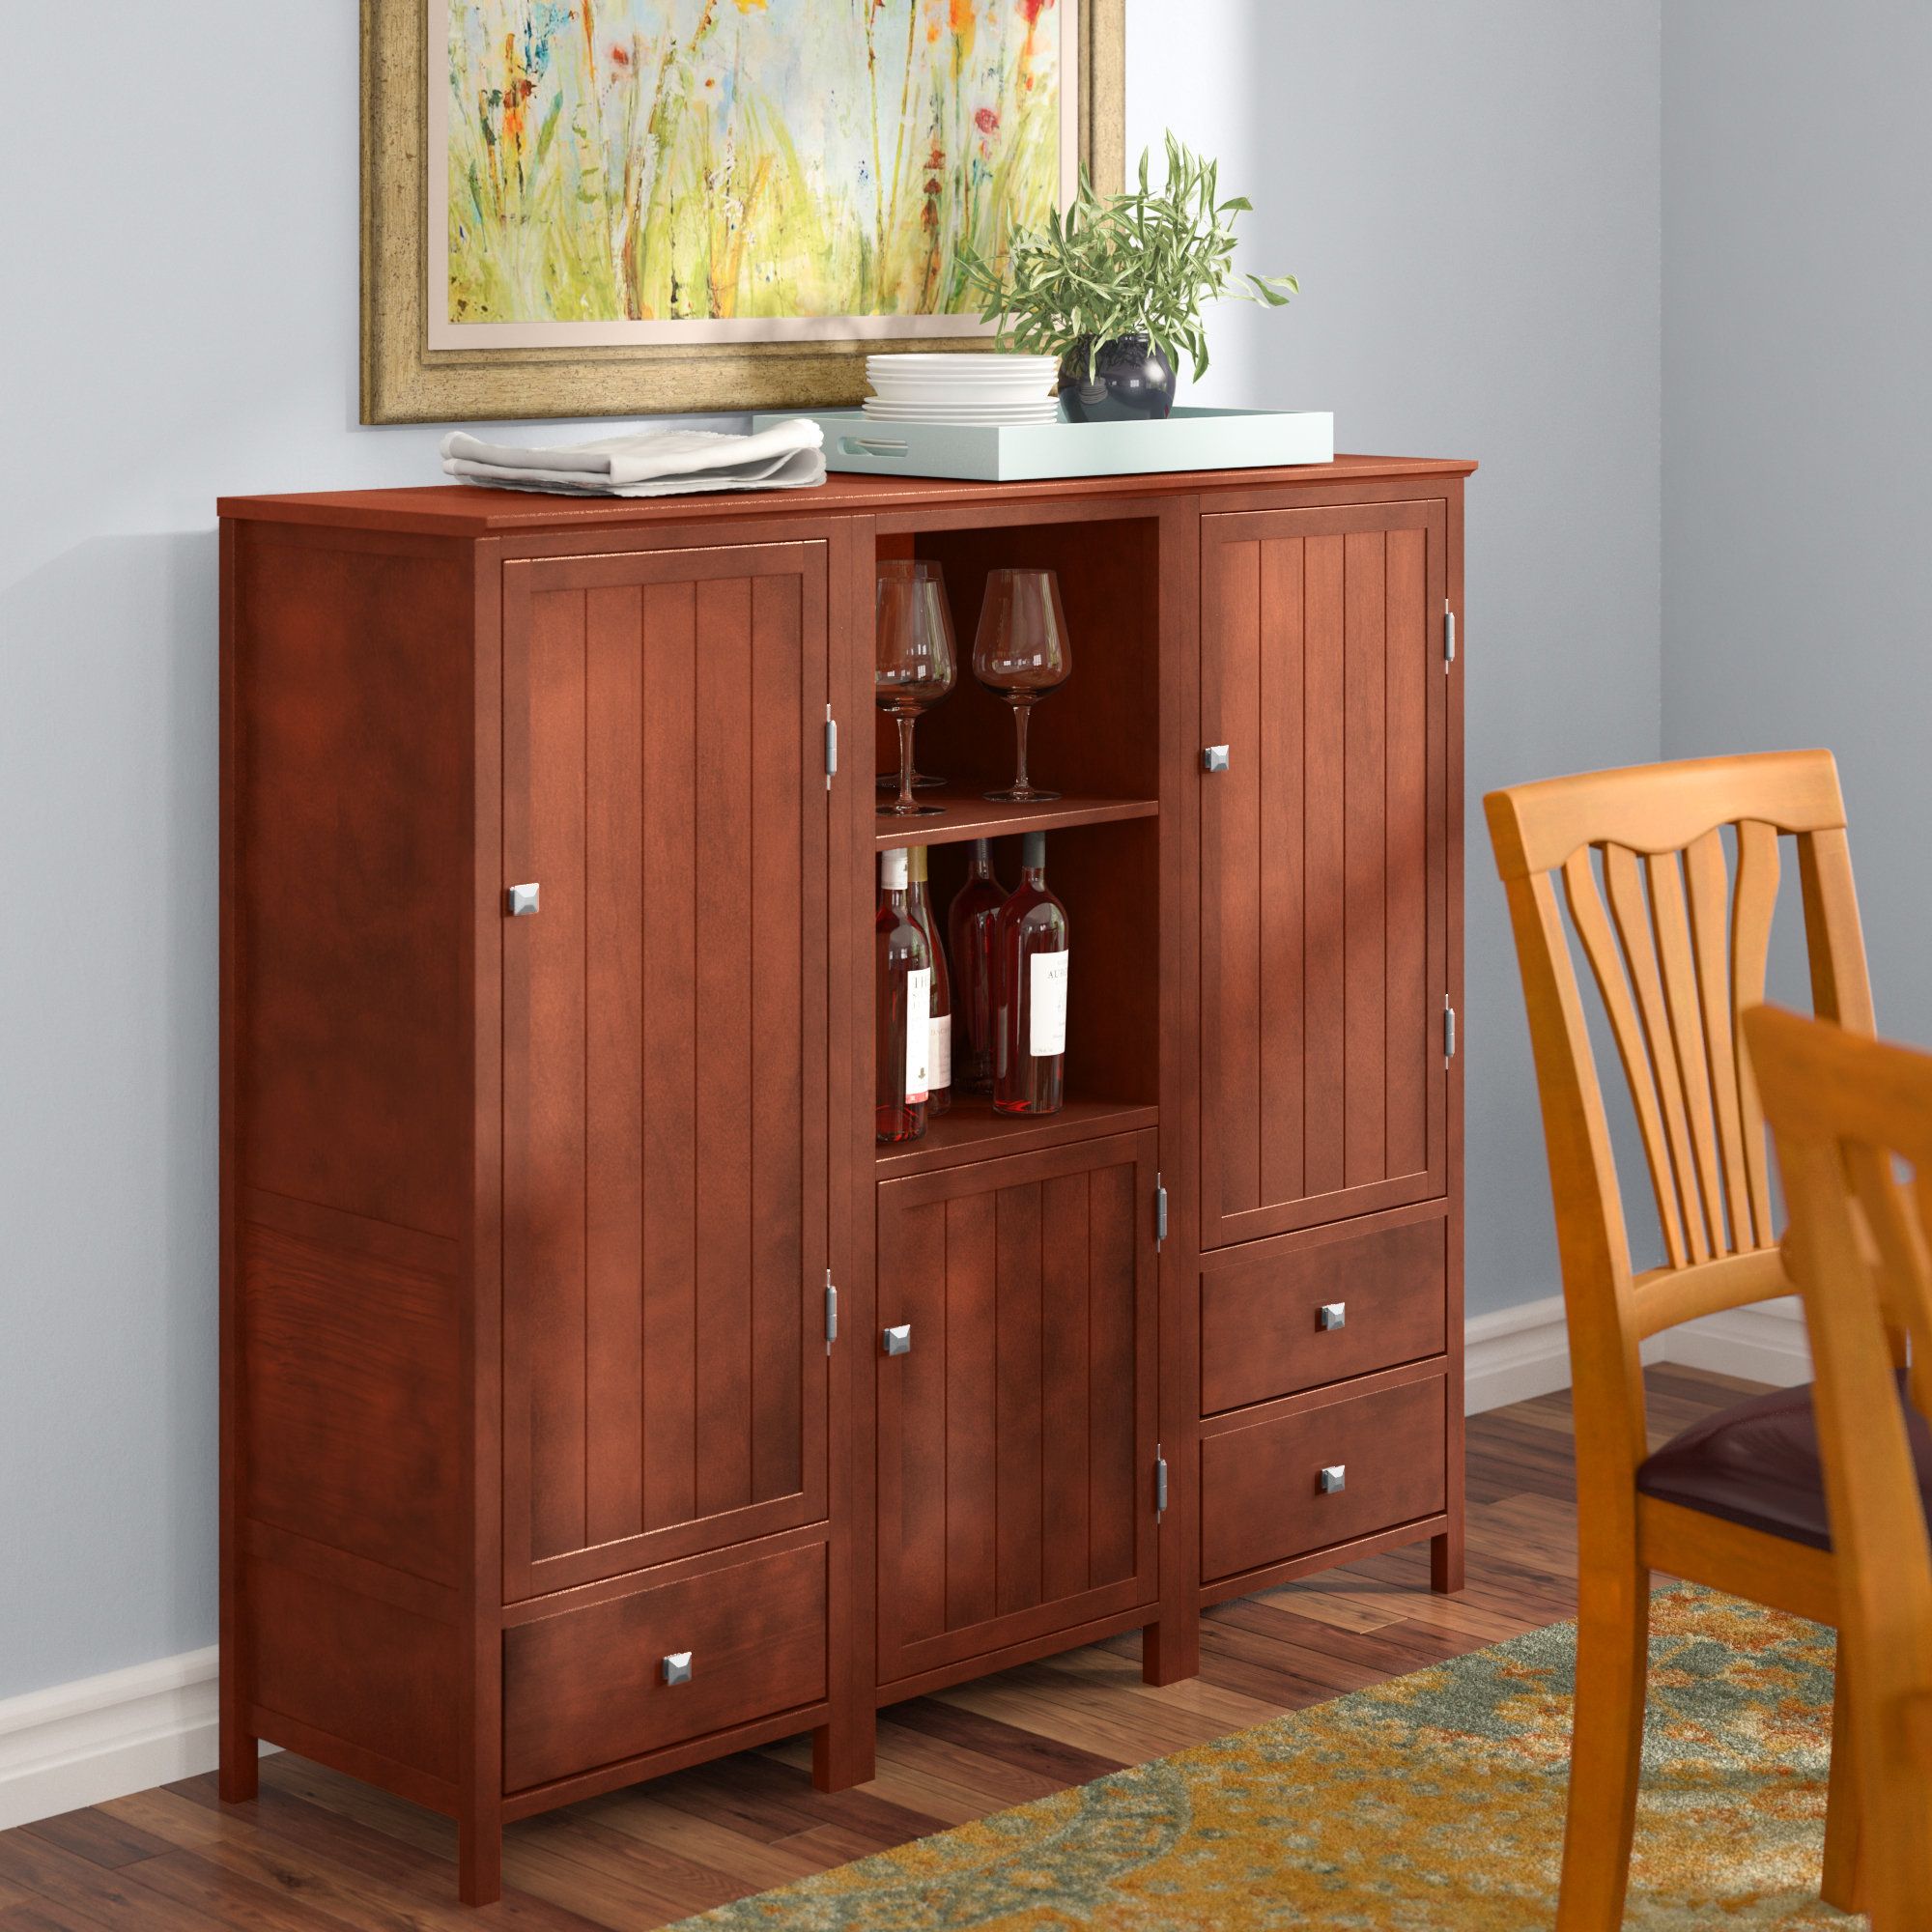 Red Barrel Studio Sideboards & Buffets You'll Love In 2019 Regarding 2017 Massillon Sideboards (View 10 of 20)